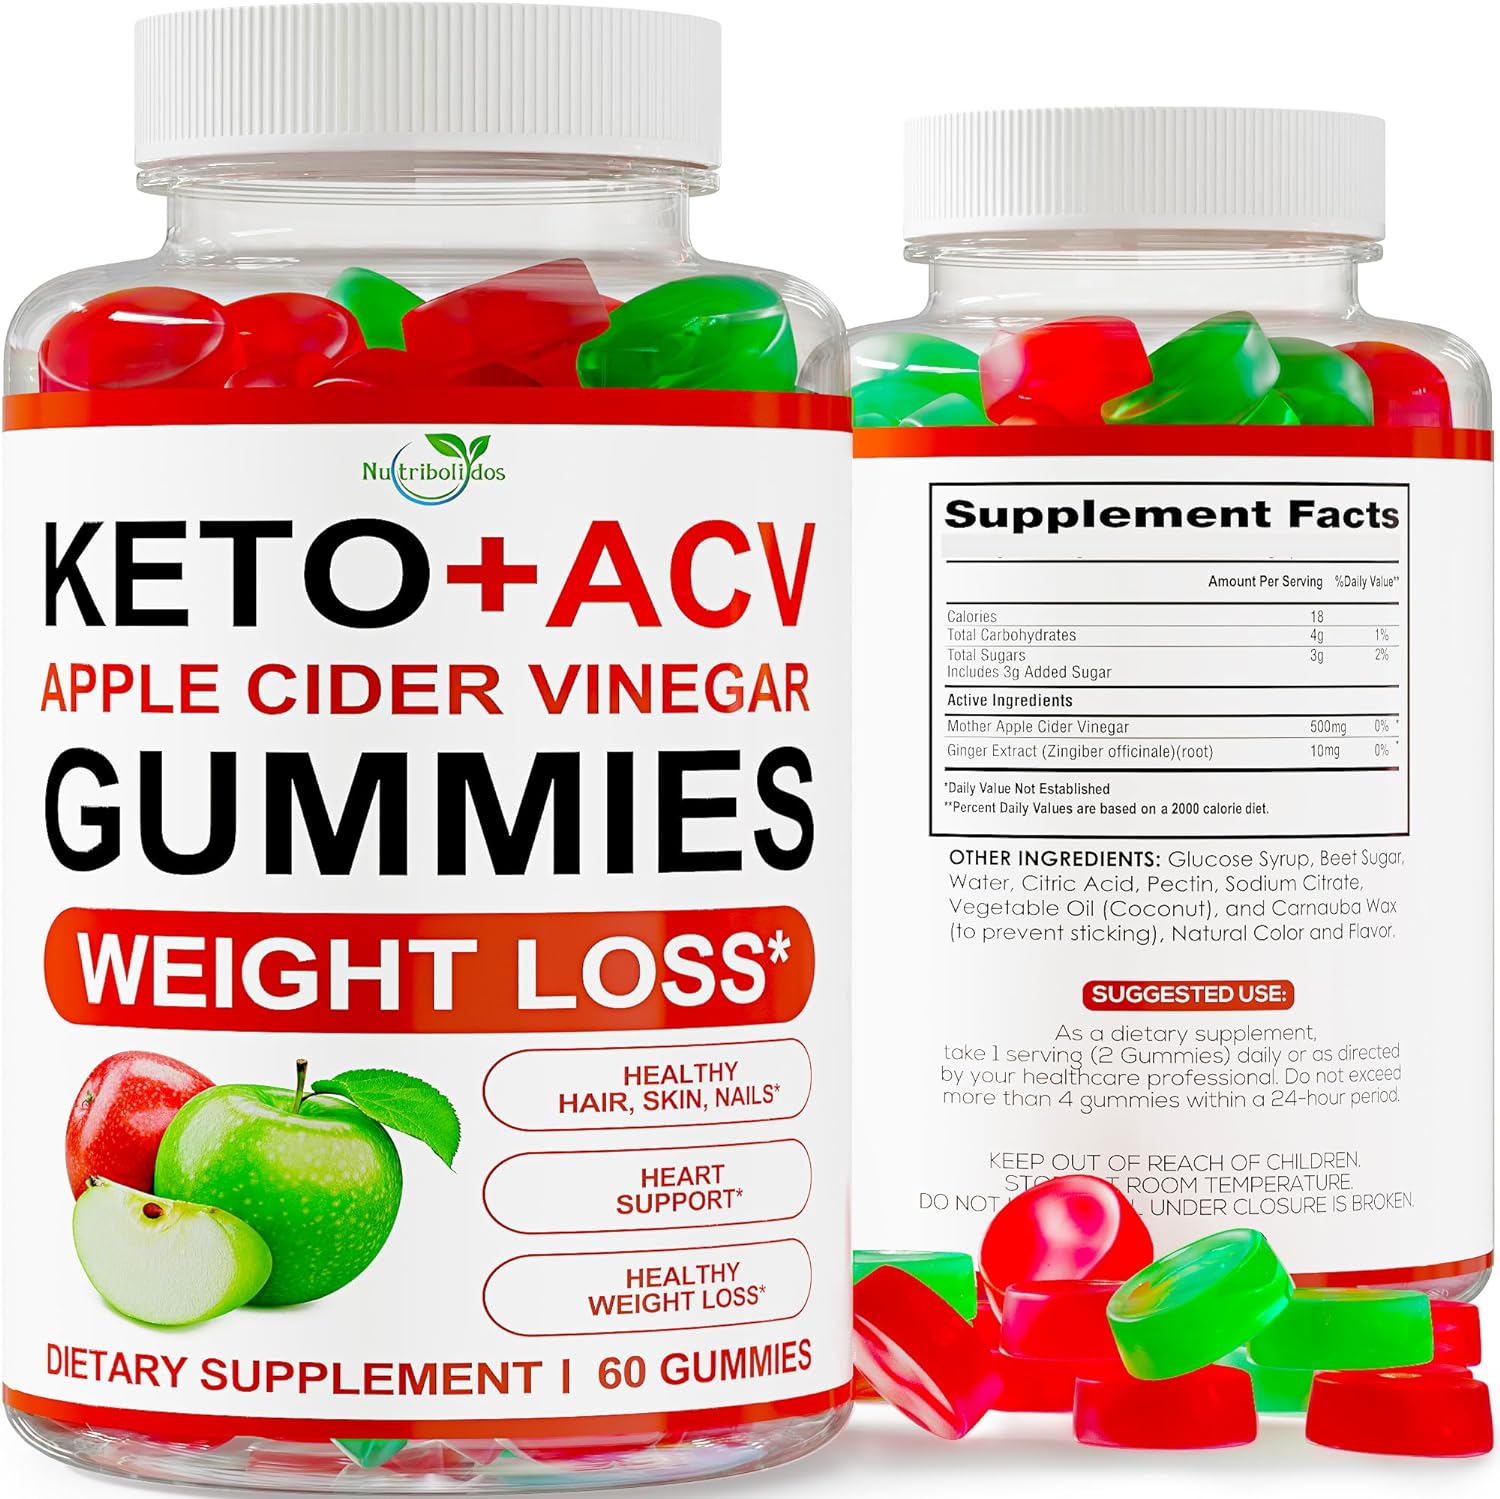 Keto ACV Gummies Advanced Weight Loss - ACV Keto Gummies for Weight Loss - Keto Gummy Supplement for Women and Men - Cleanse - Detox - Apple Cider Vinegar for - Made in USA - McIntosh Flavor